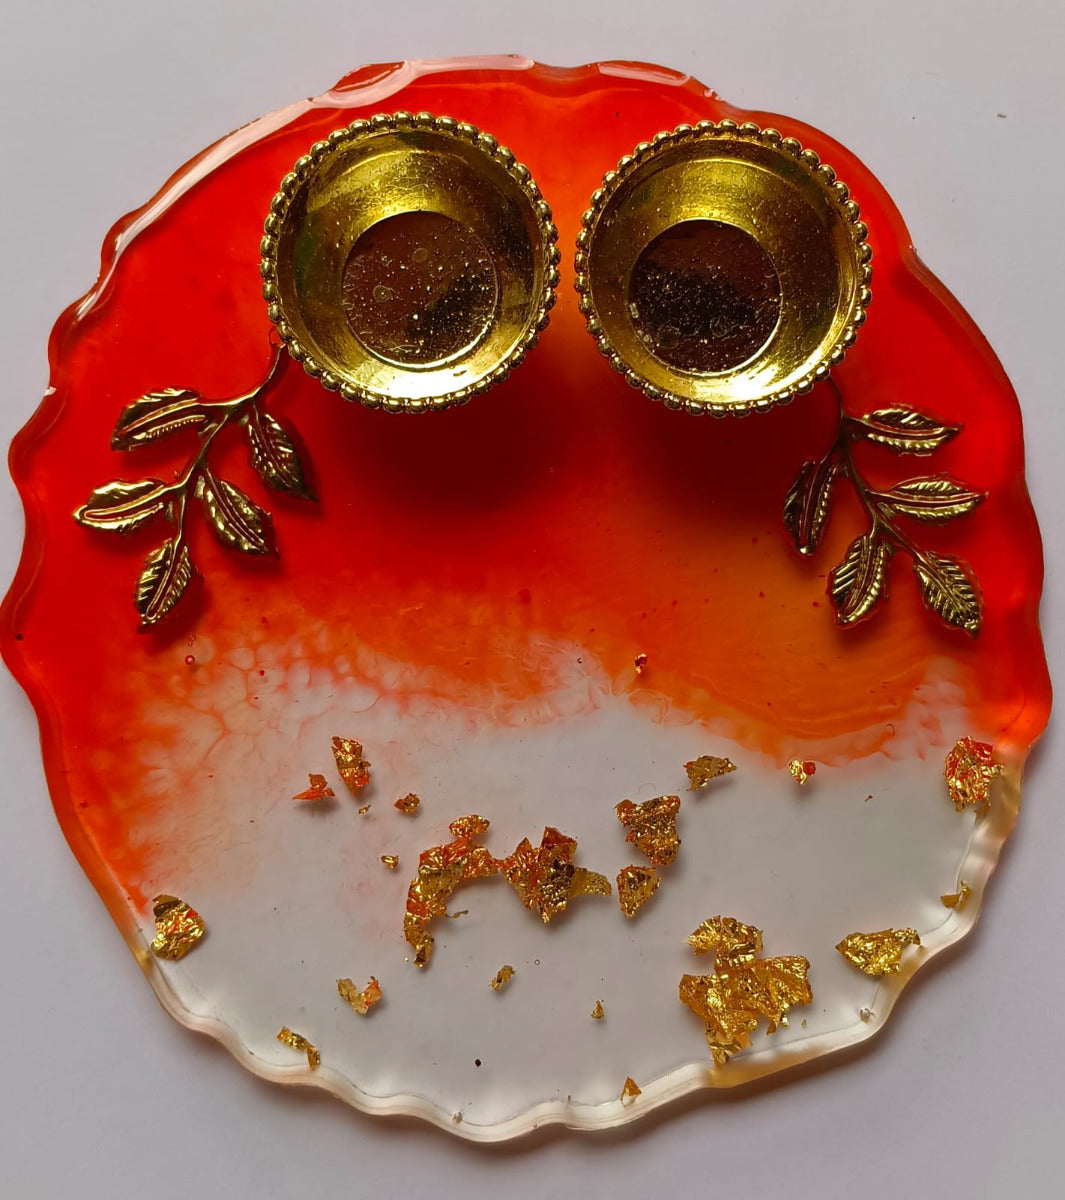 Resin Decorated Pooja / Tilak Thali (4.5 Inches)